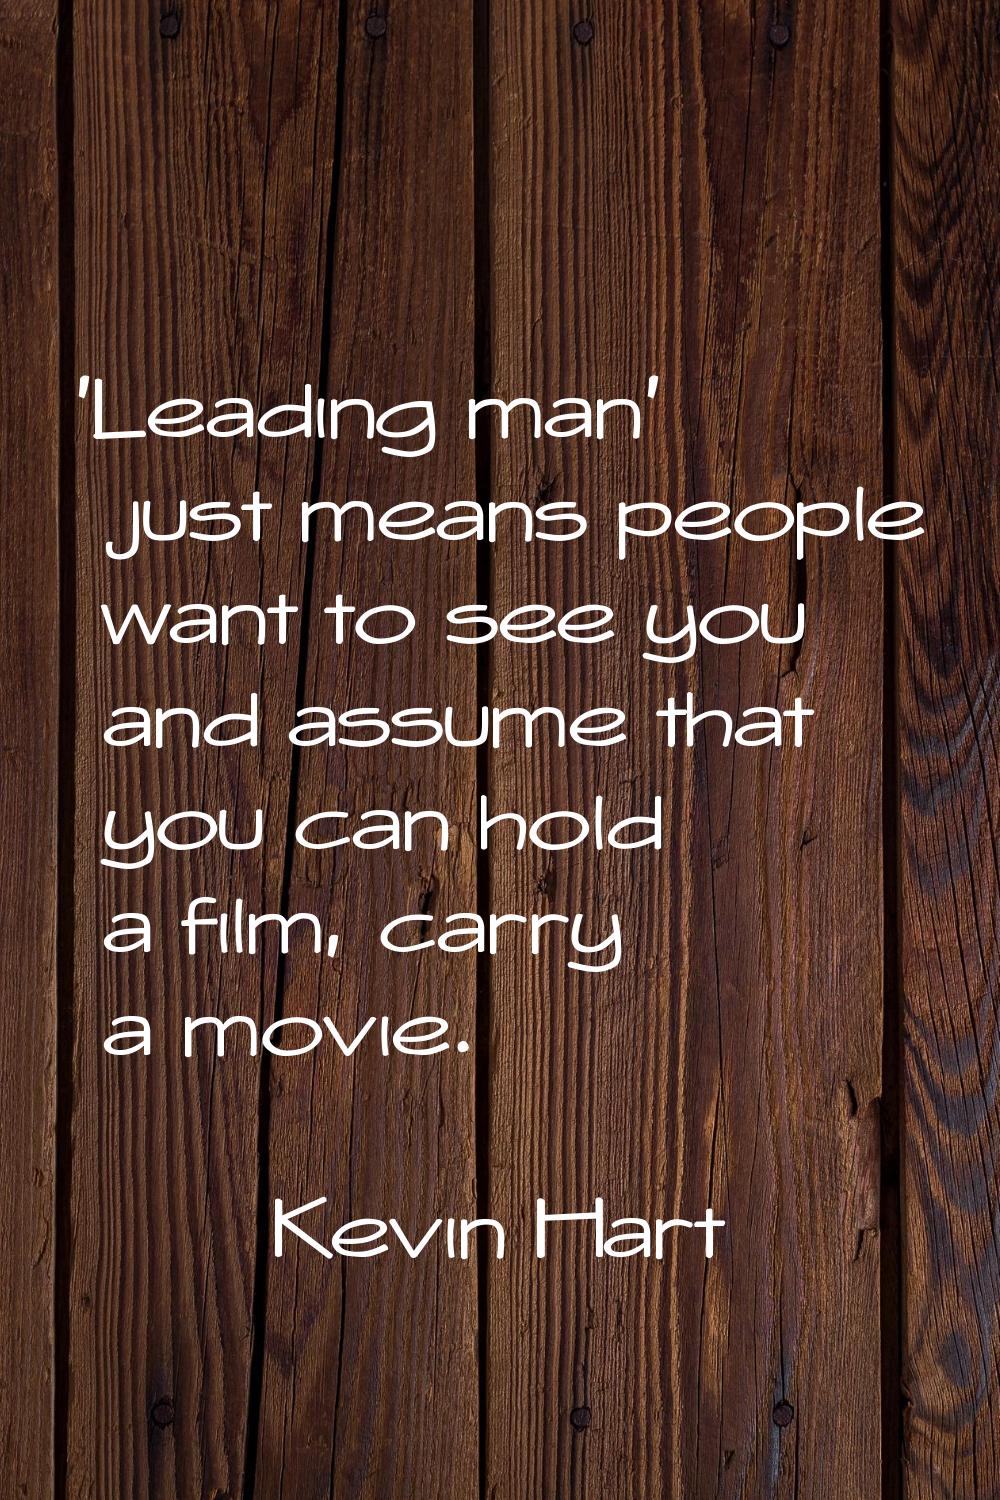 'Leading man' just means people want to see you and assume that you can hold a film, carry a movie.